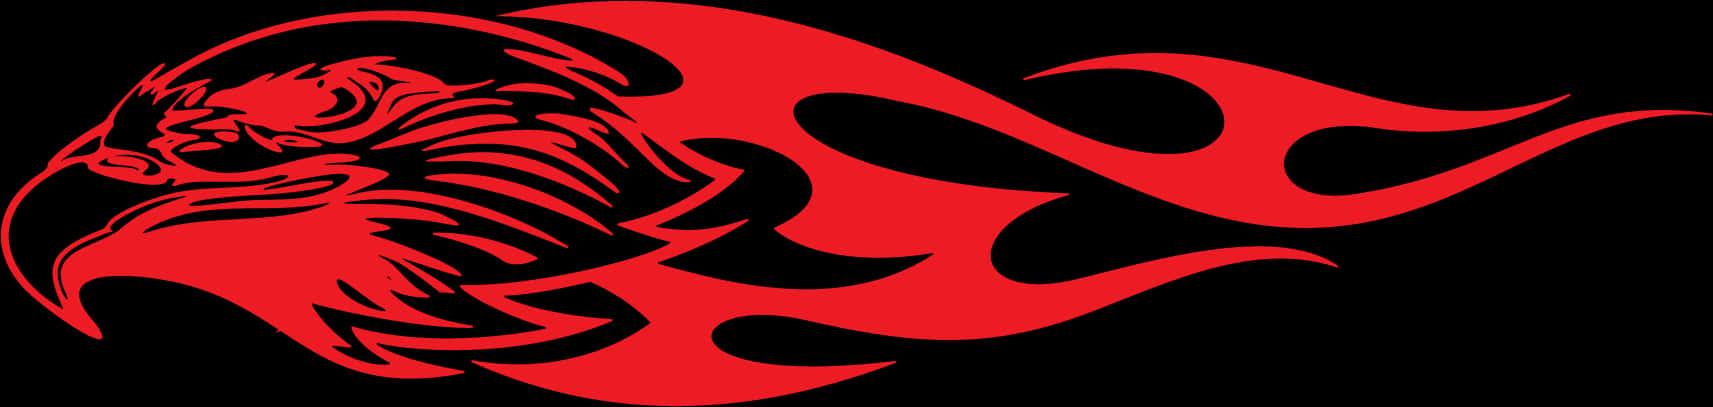 Eagle Head And Red Flames